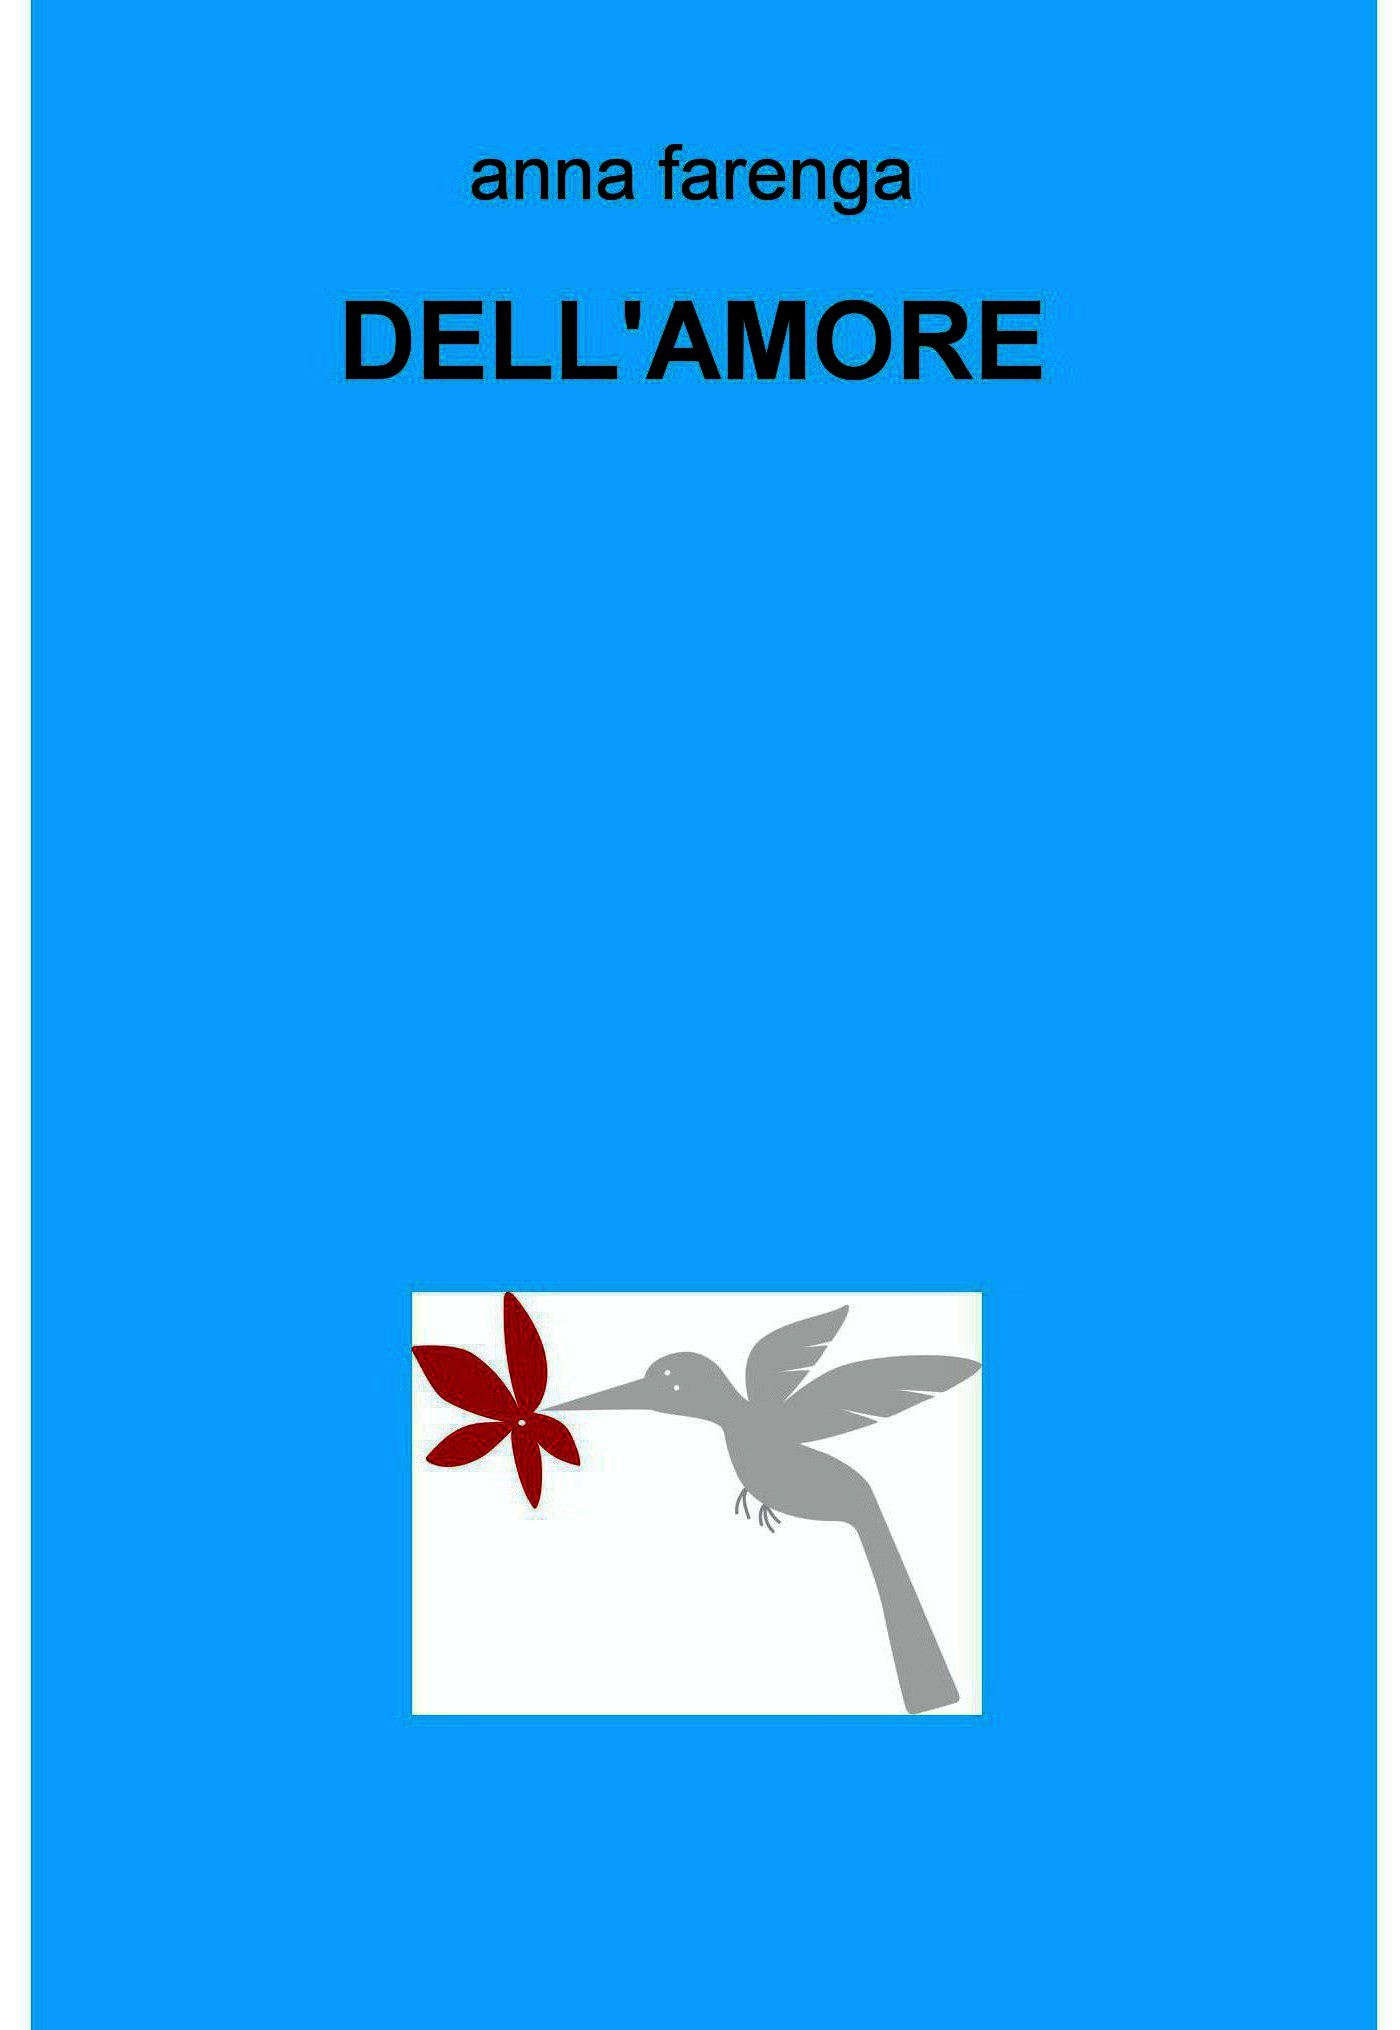 Dell'amore - Librerie.coop